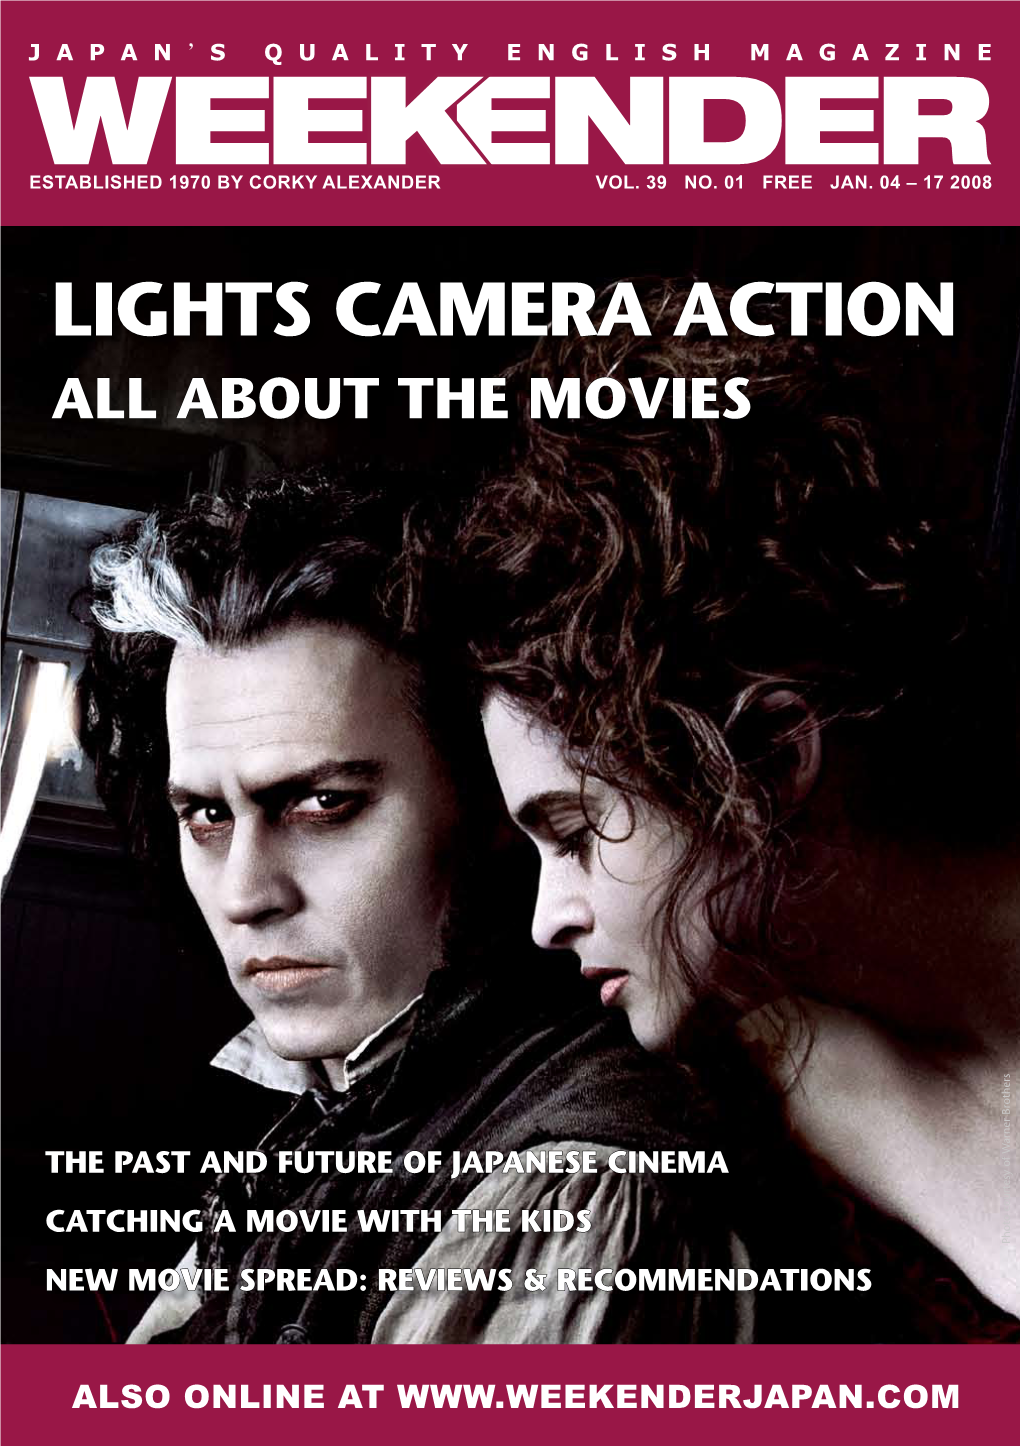 Lights Camera Action All About the Movies